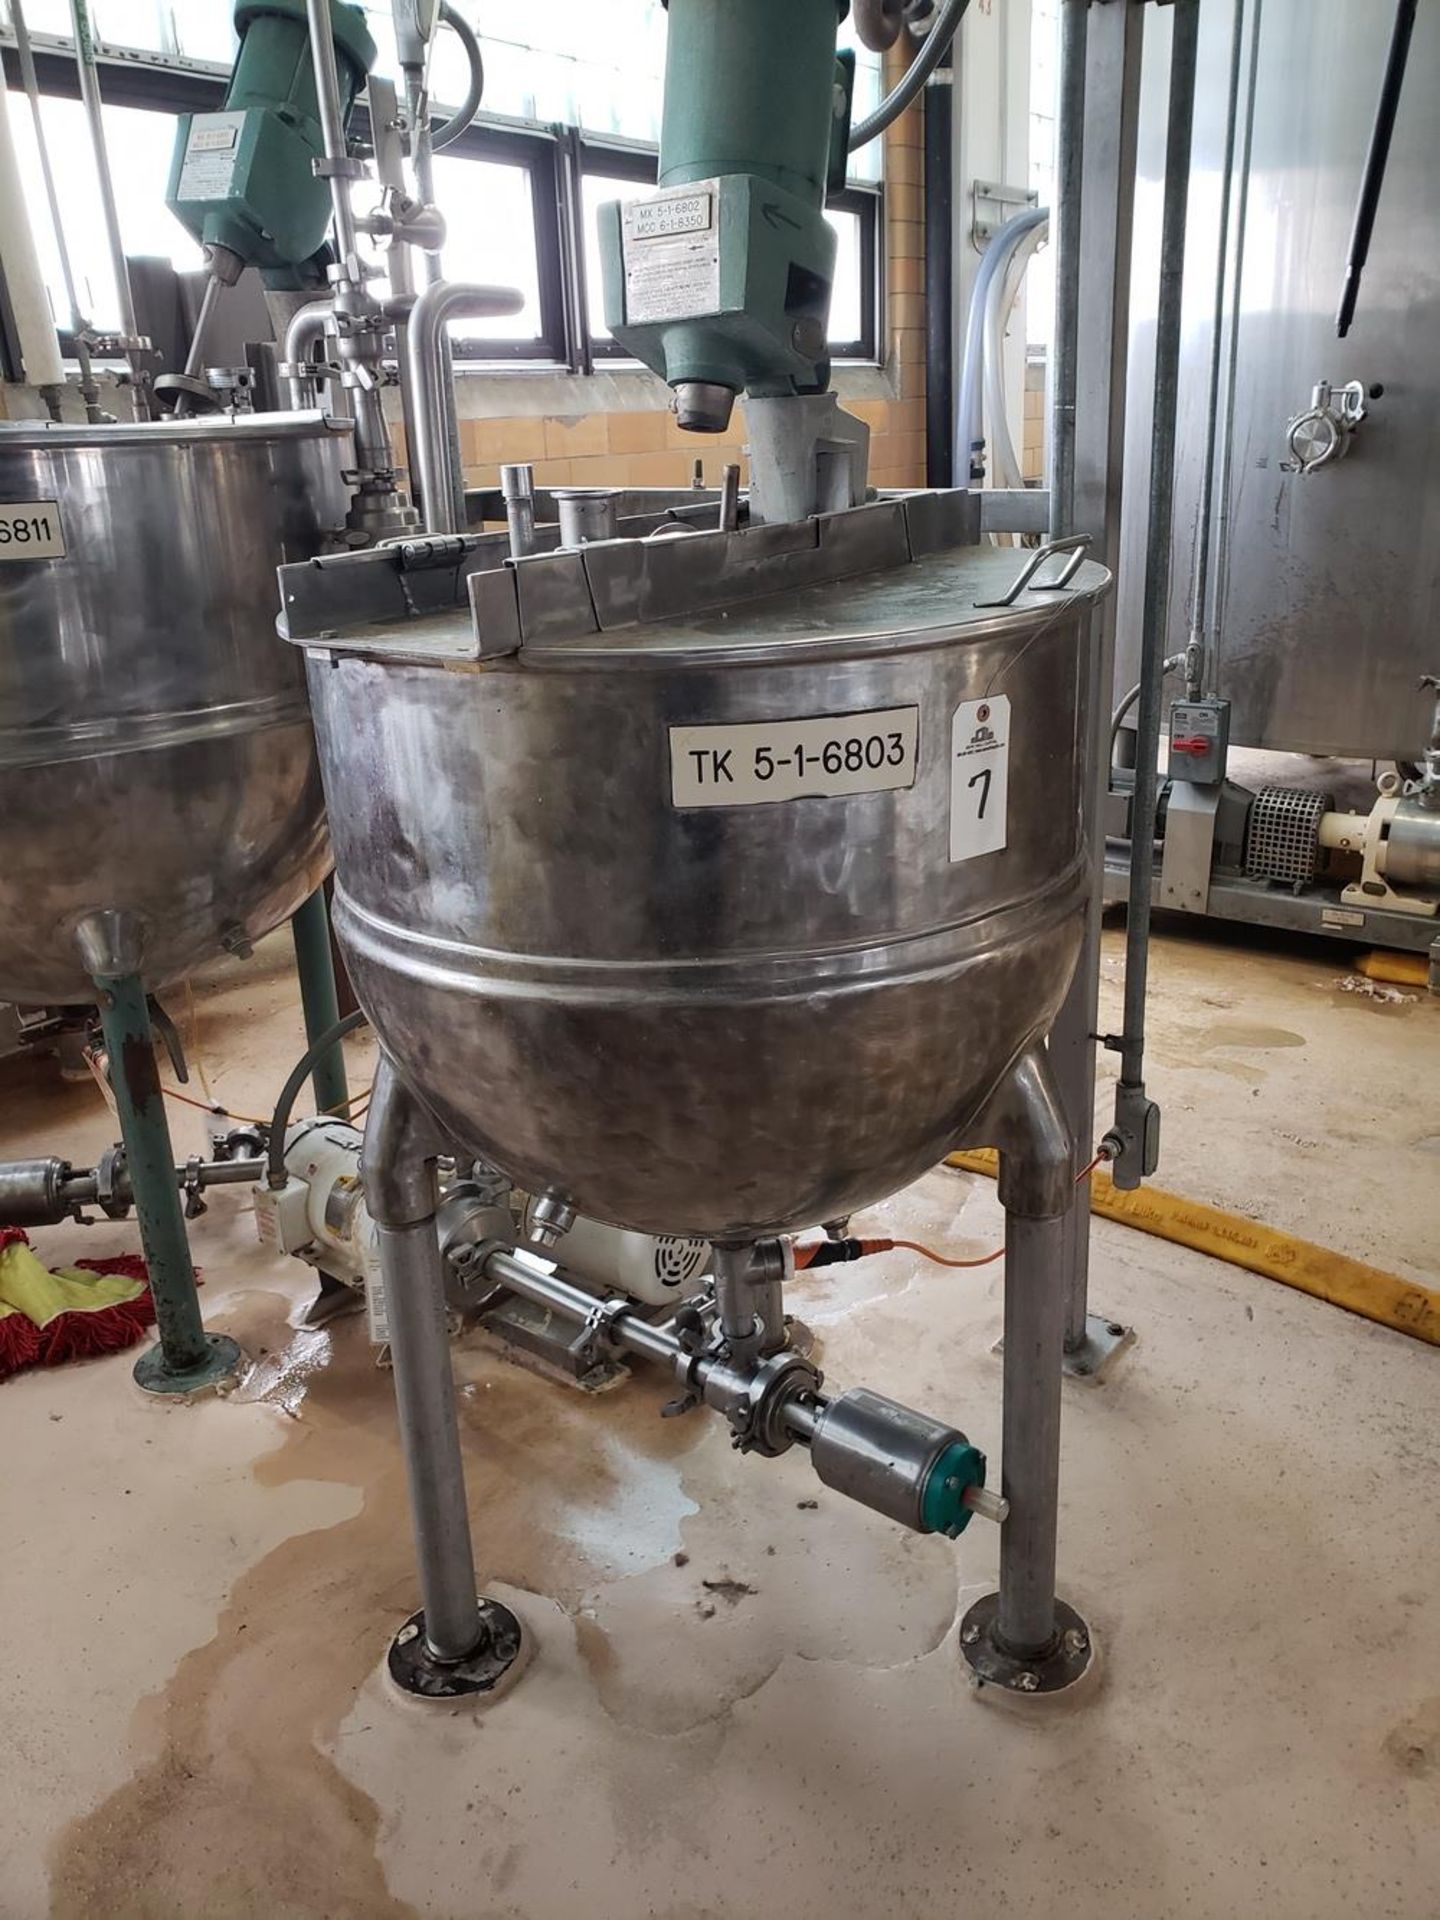 Groen 60 Gallon Jacketed, Agitated Mixing Kettle, M# SA-F-60 SP, W/ Sanitary Pump, | Rig Fee: $250